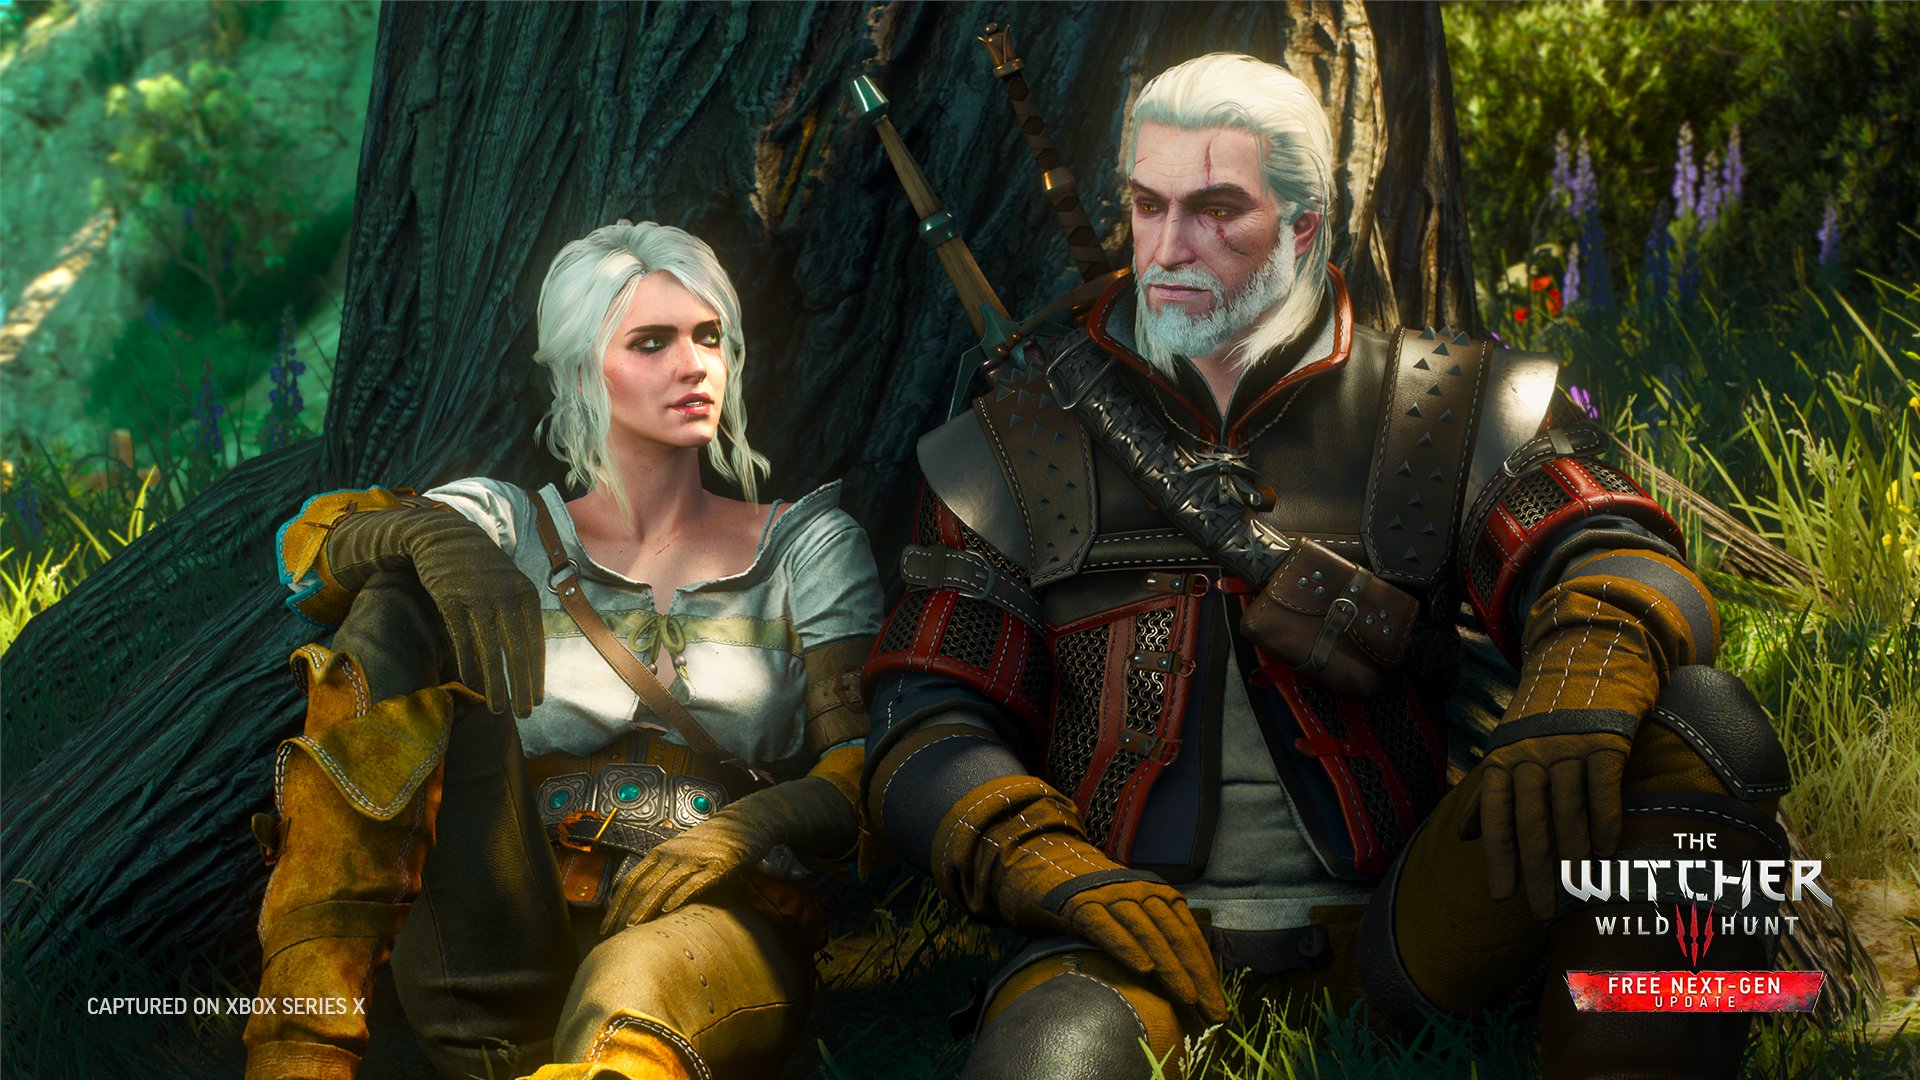 The Max Level Cap in The Witcher 3: Wild Hunt